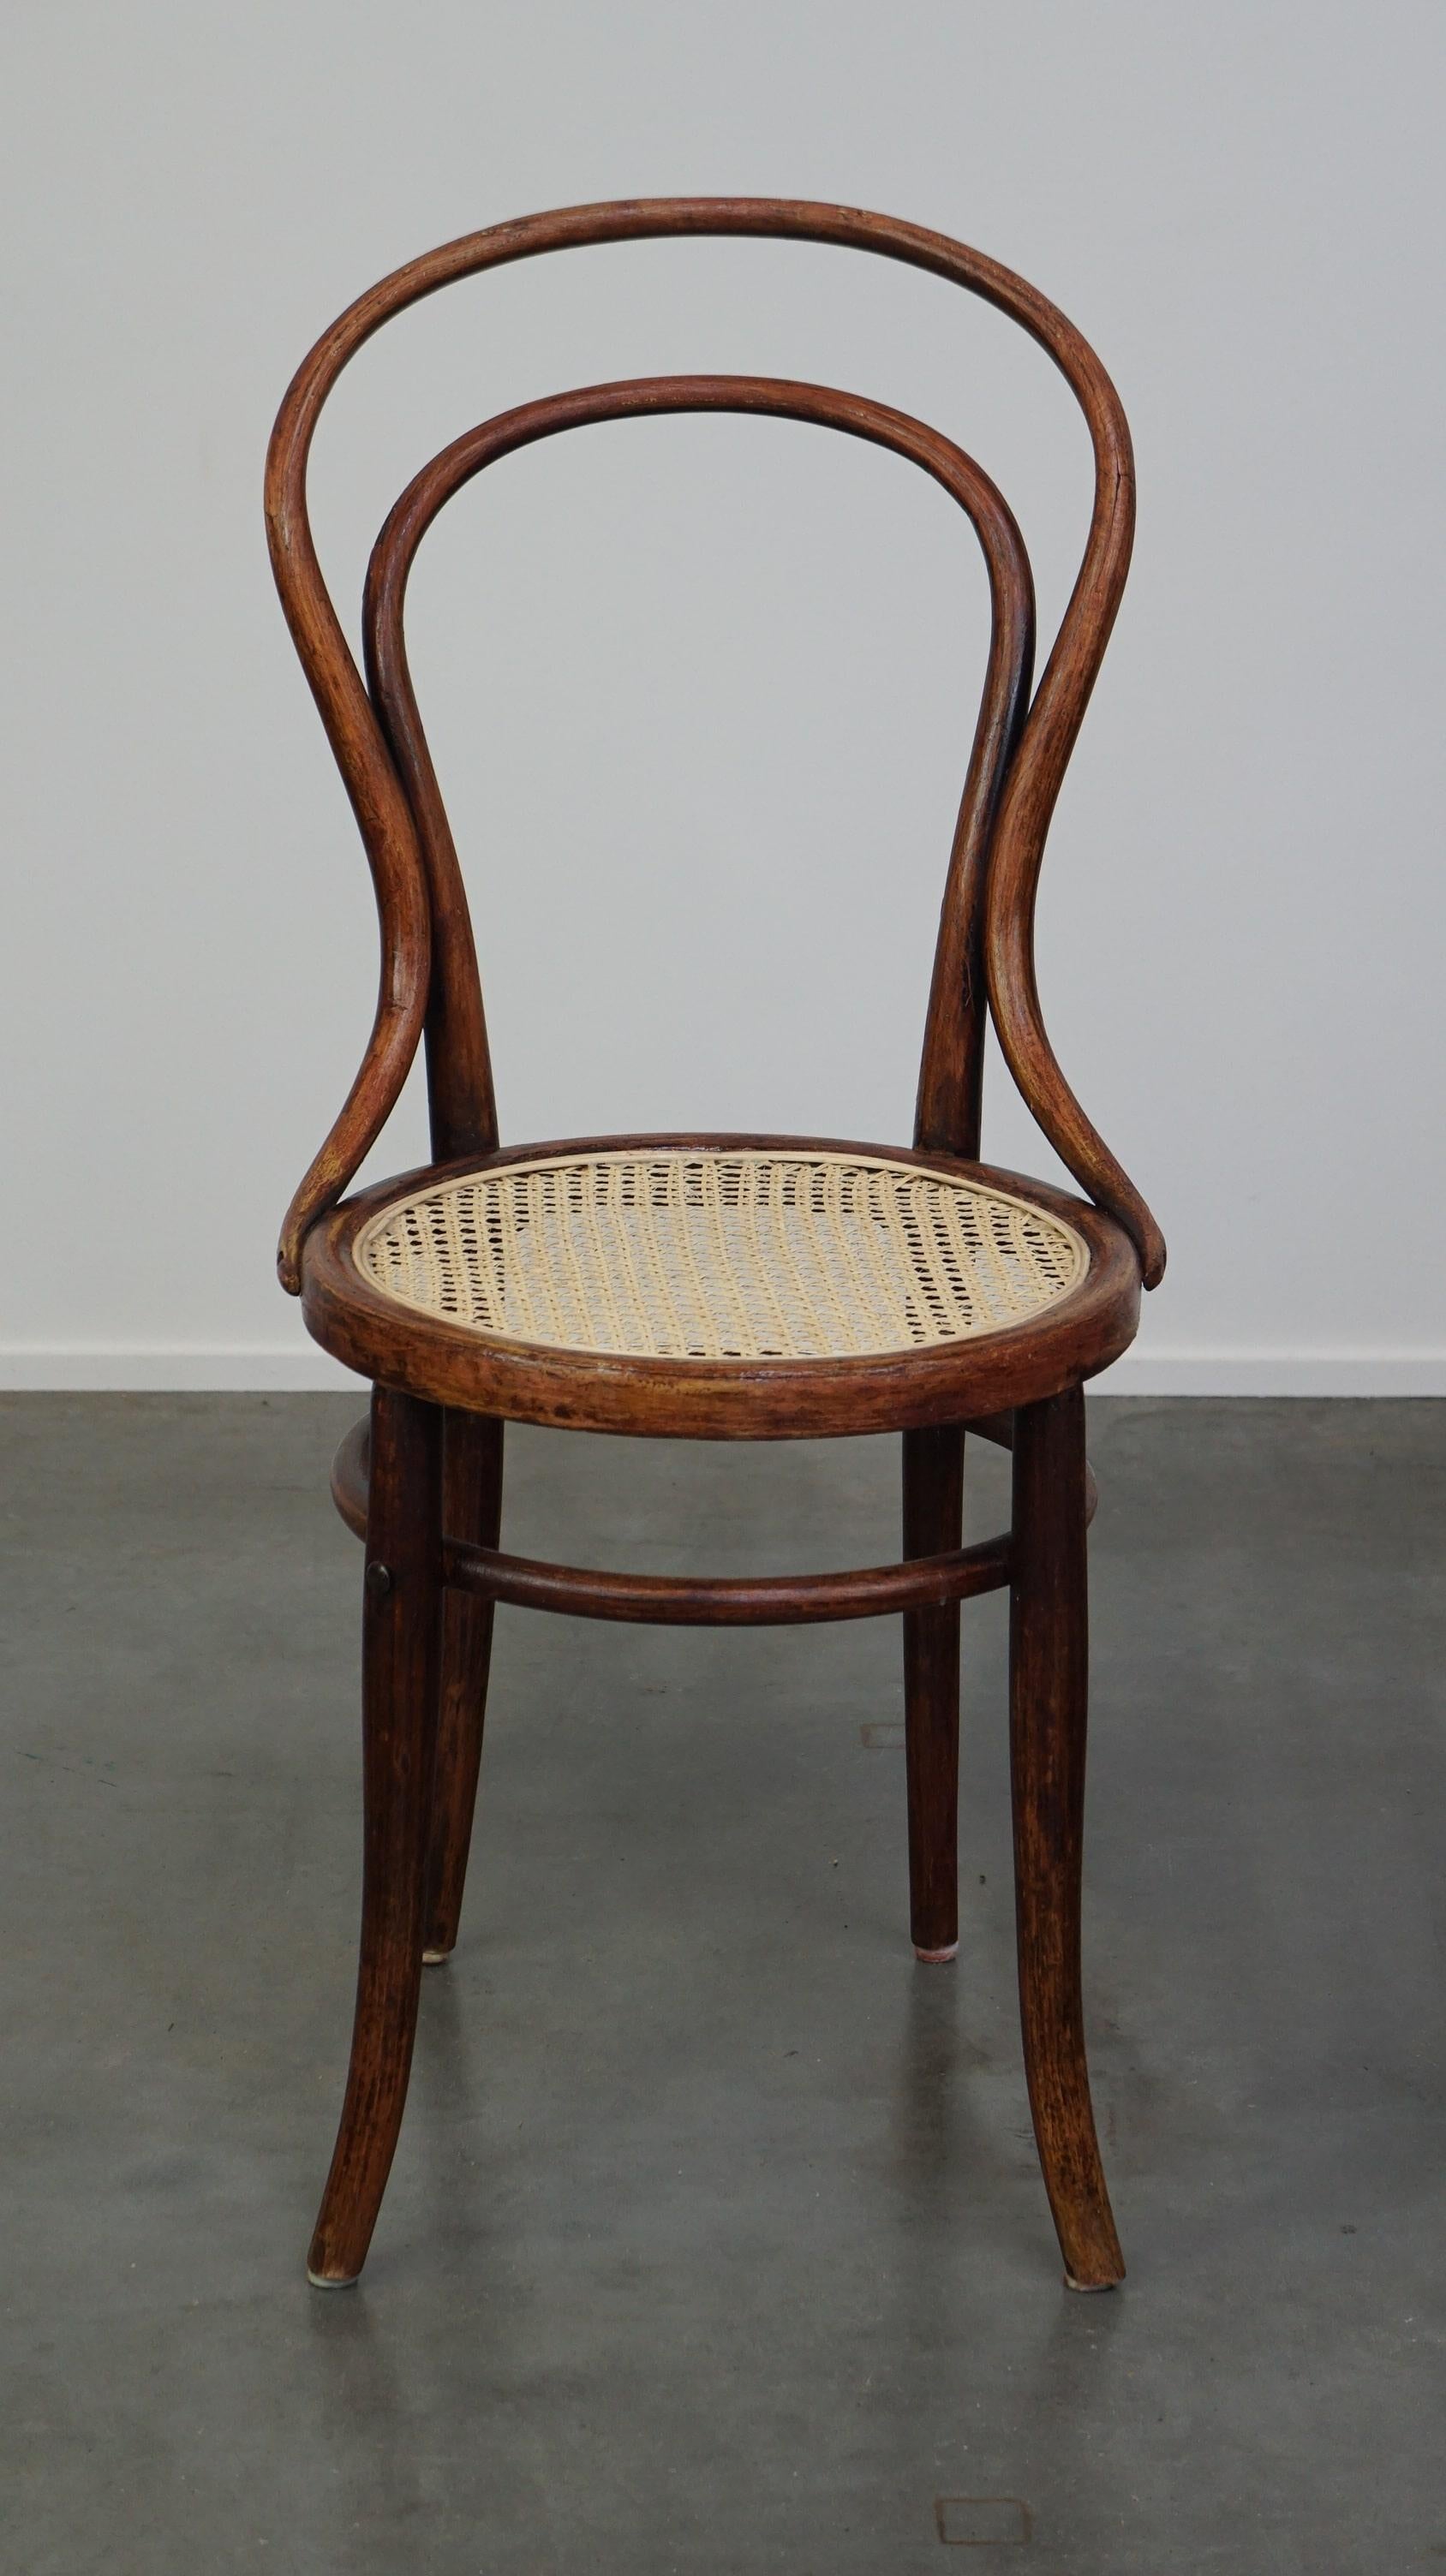 This antique bistro chair, model no. 14, was designed by Thonet and was one of Thonet's most popular chairs alongside chair no. 18. This chair was produced by the Austrian Josef Hoffmann, probably around 1900. This model is still being produced, but